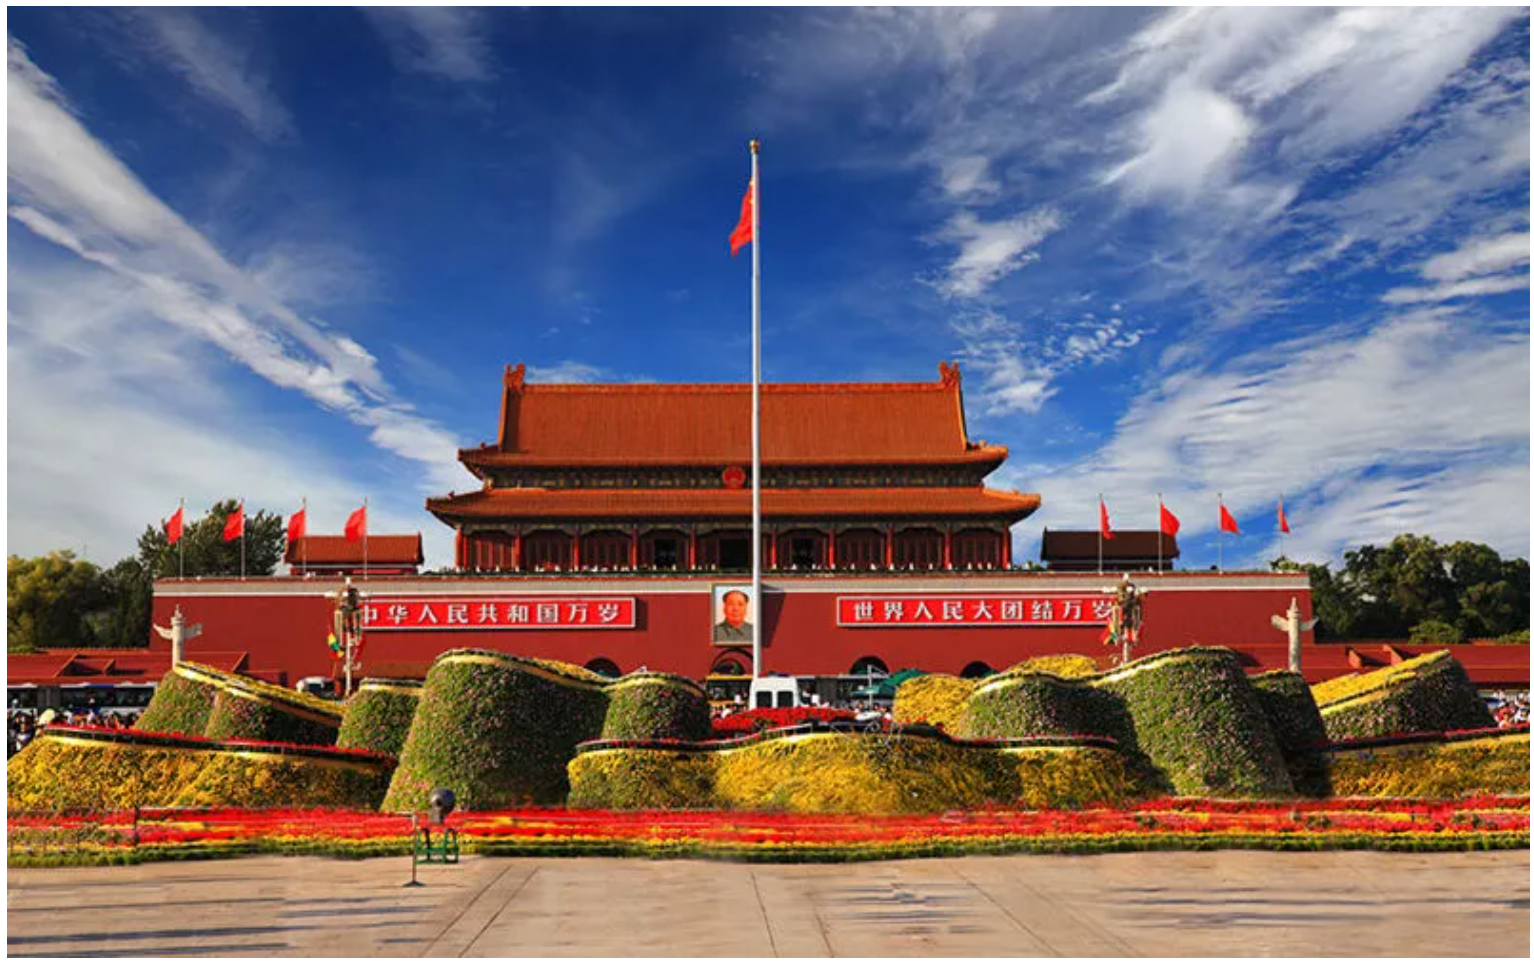 China's National Day October 1st 2020 - Tian'anmen Square.png